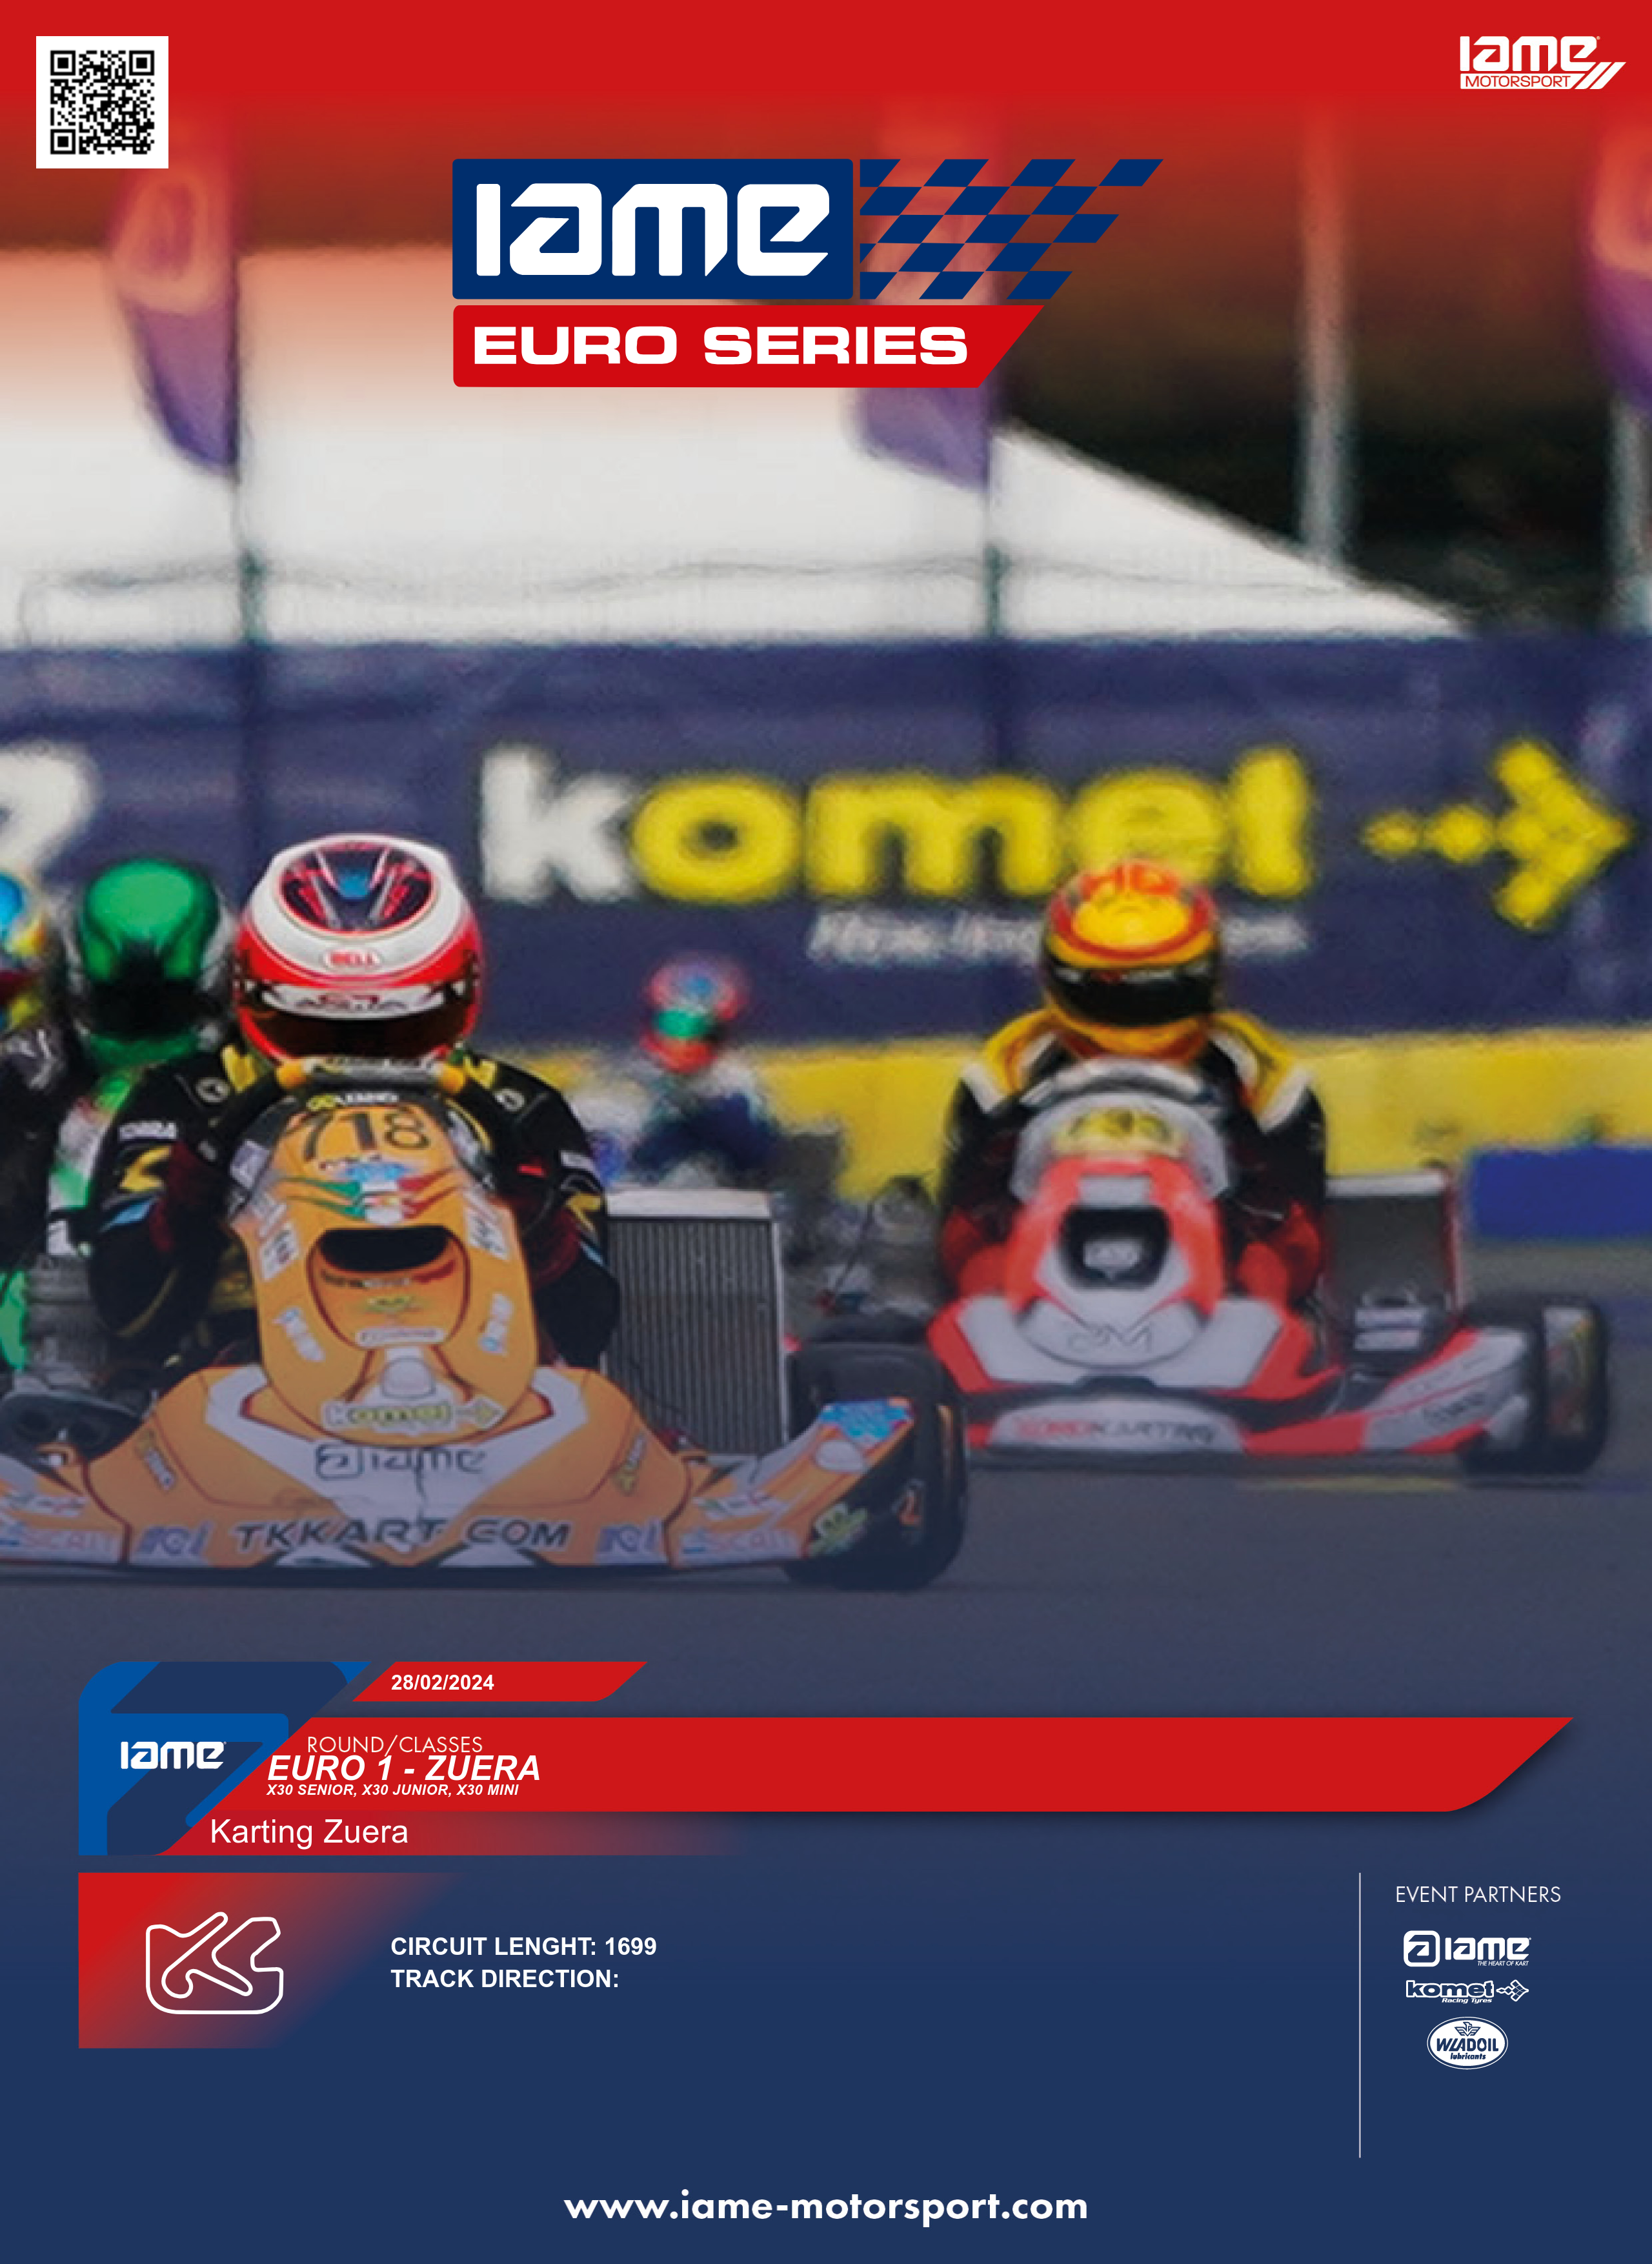 Revving up for the Euro 1 - Zuera: A Karting Spectacle Featuring IAME's Finest